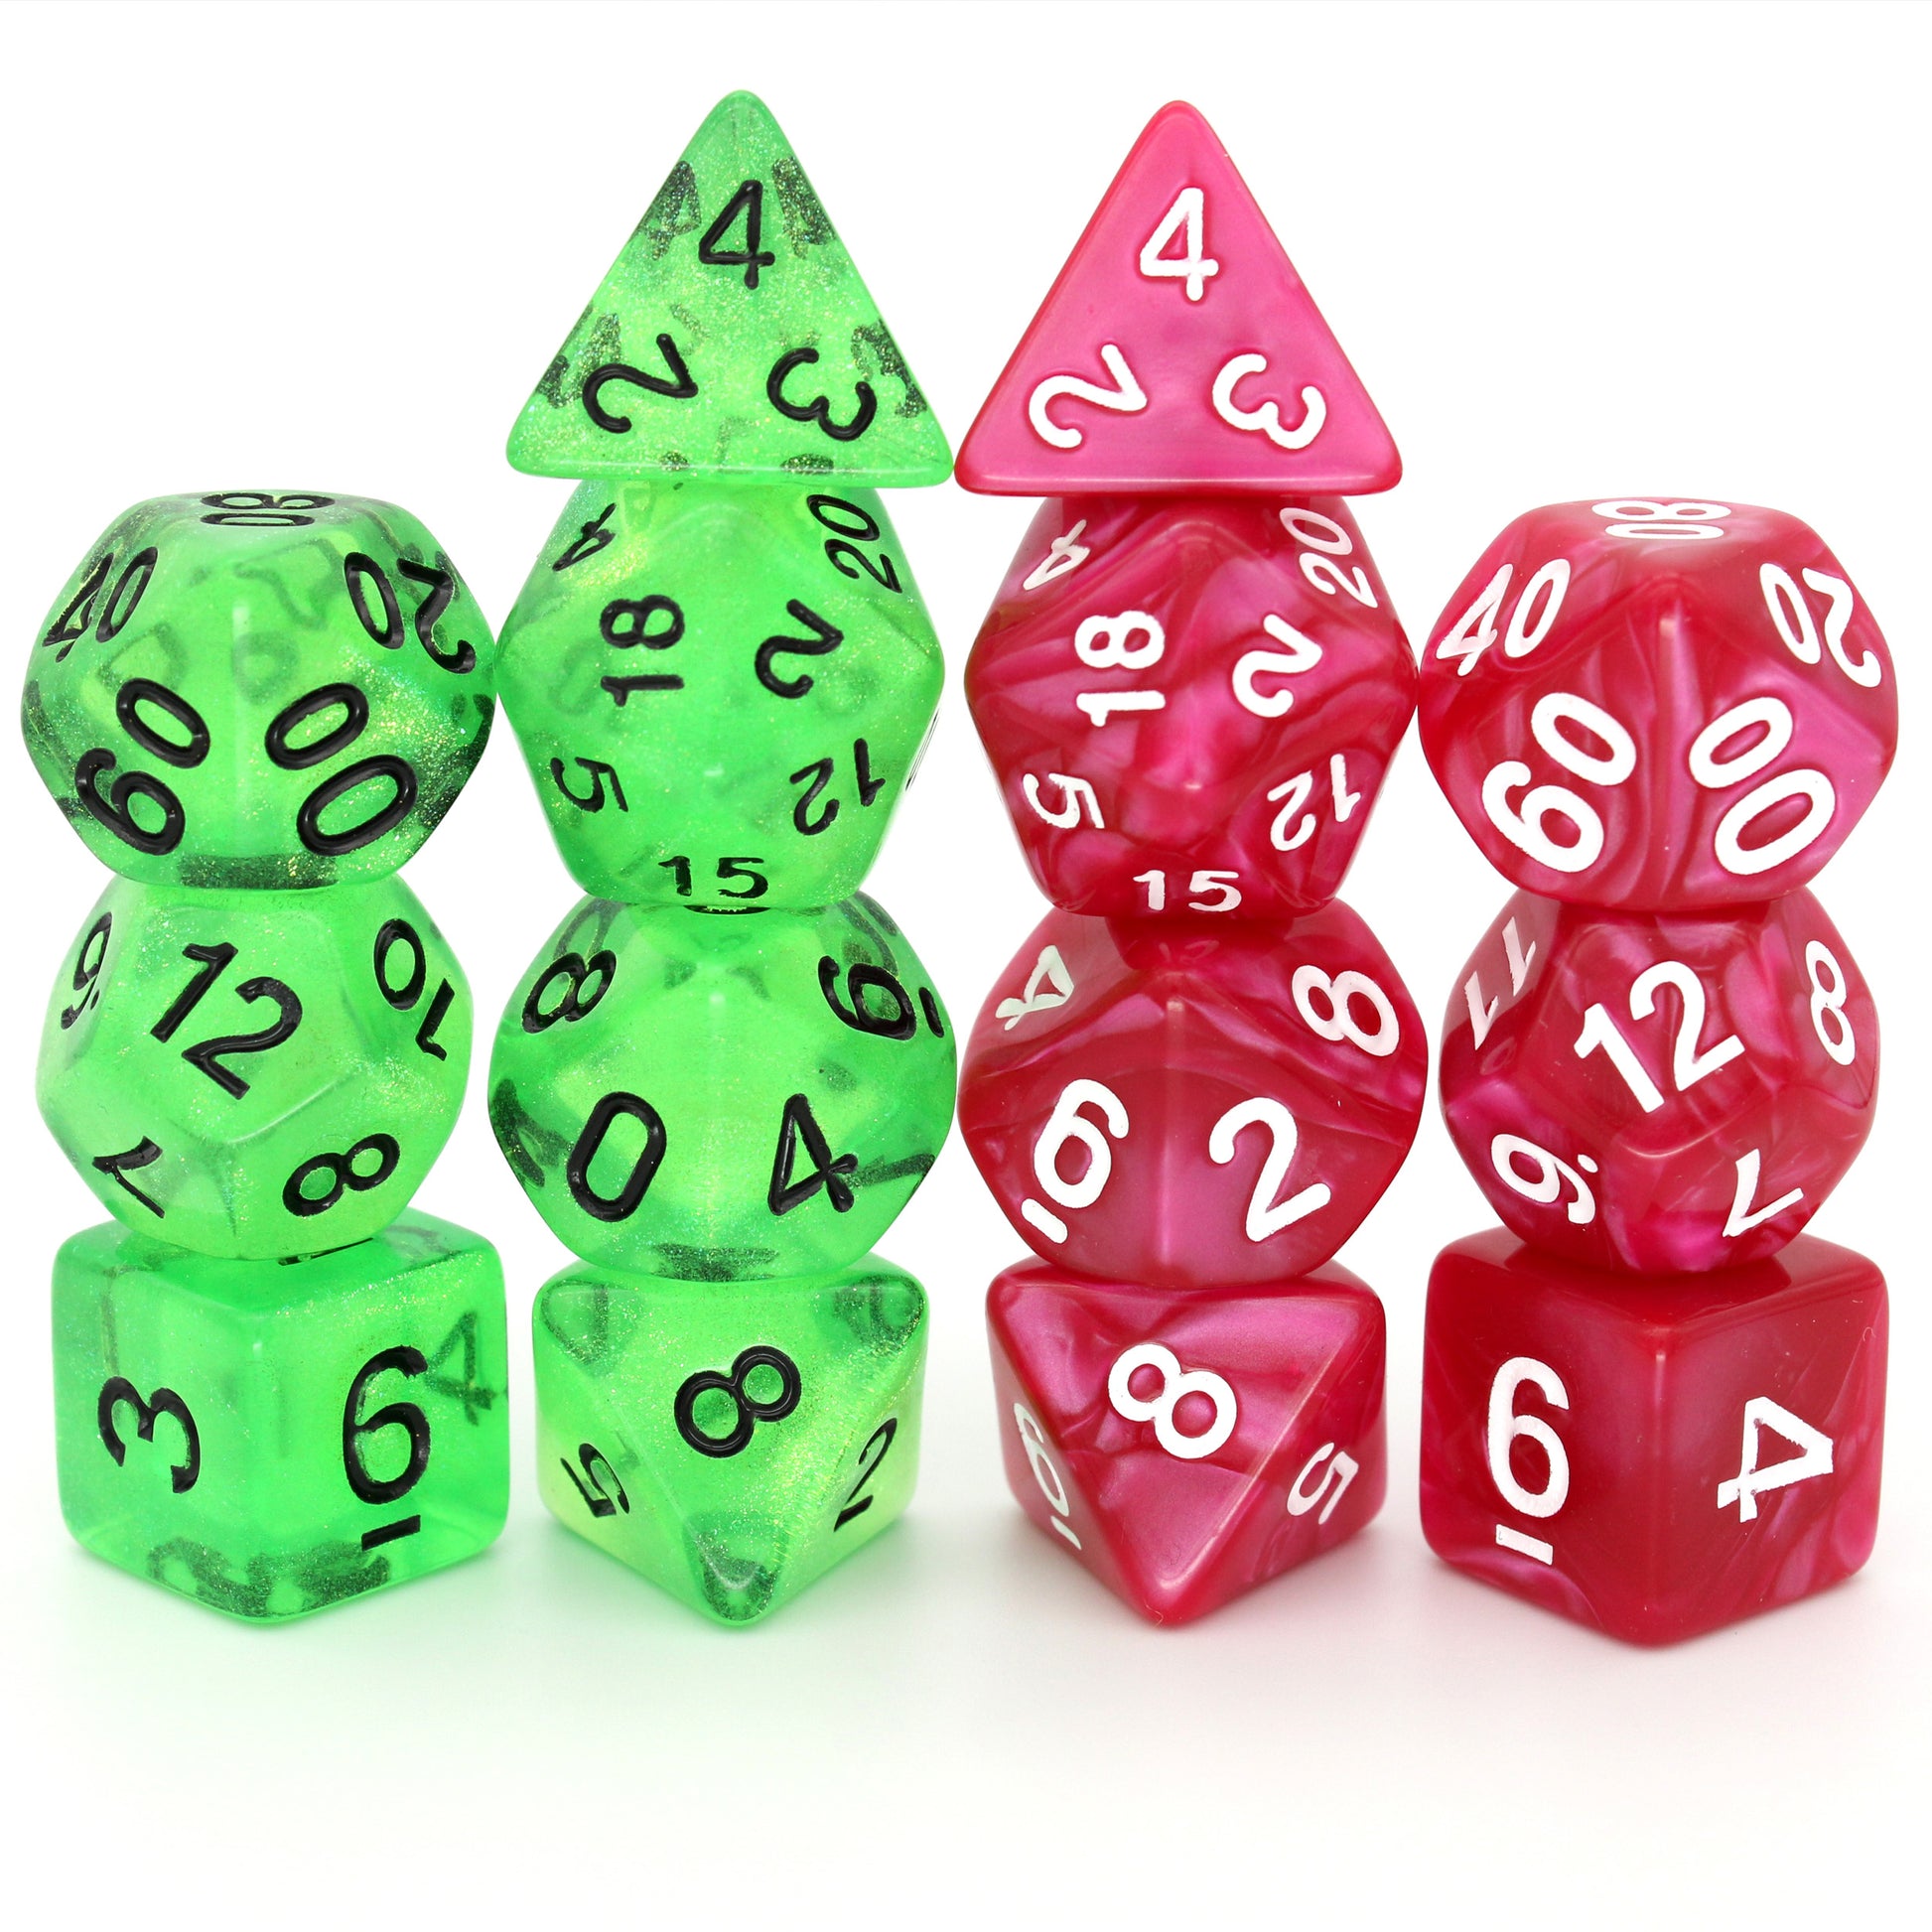 Endless Bag of Dice- Monthly Dice Subscription - Critical Dice